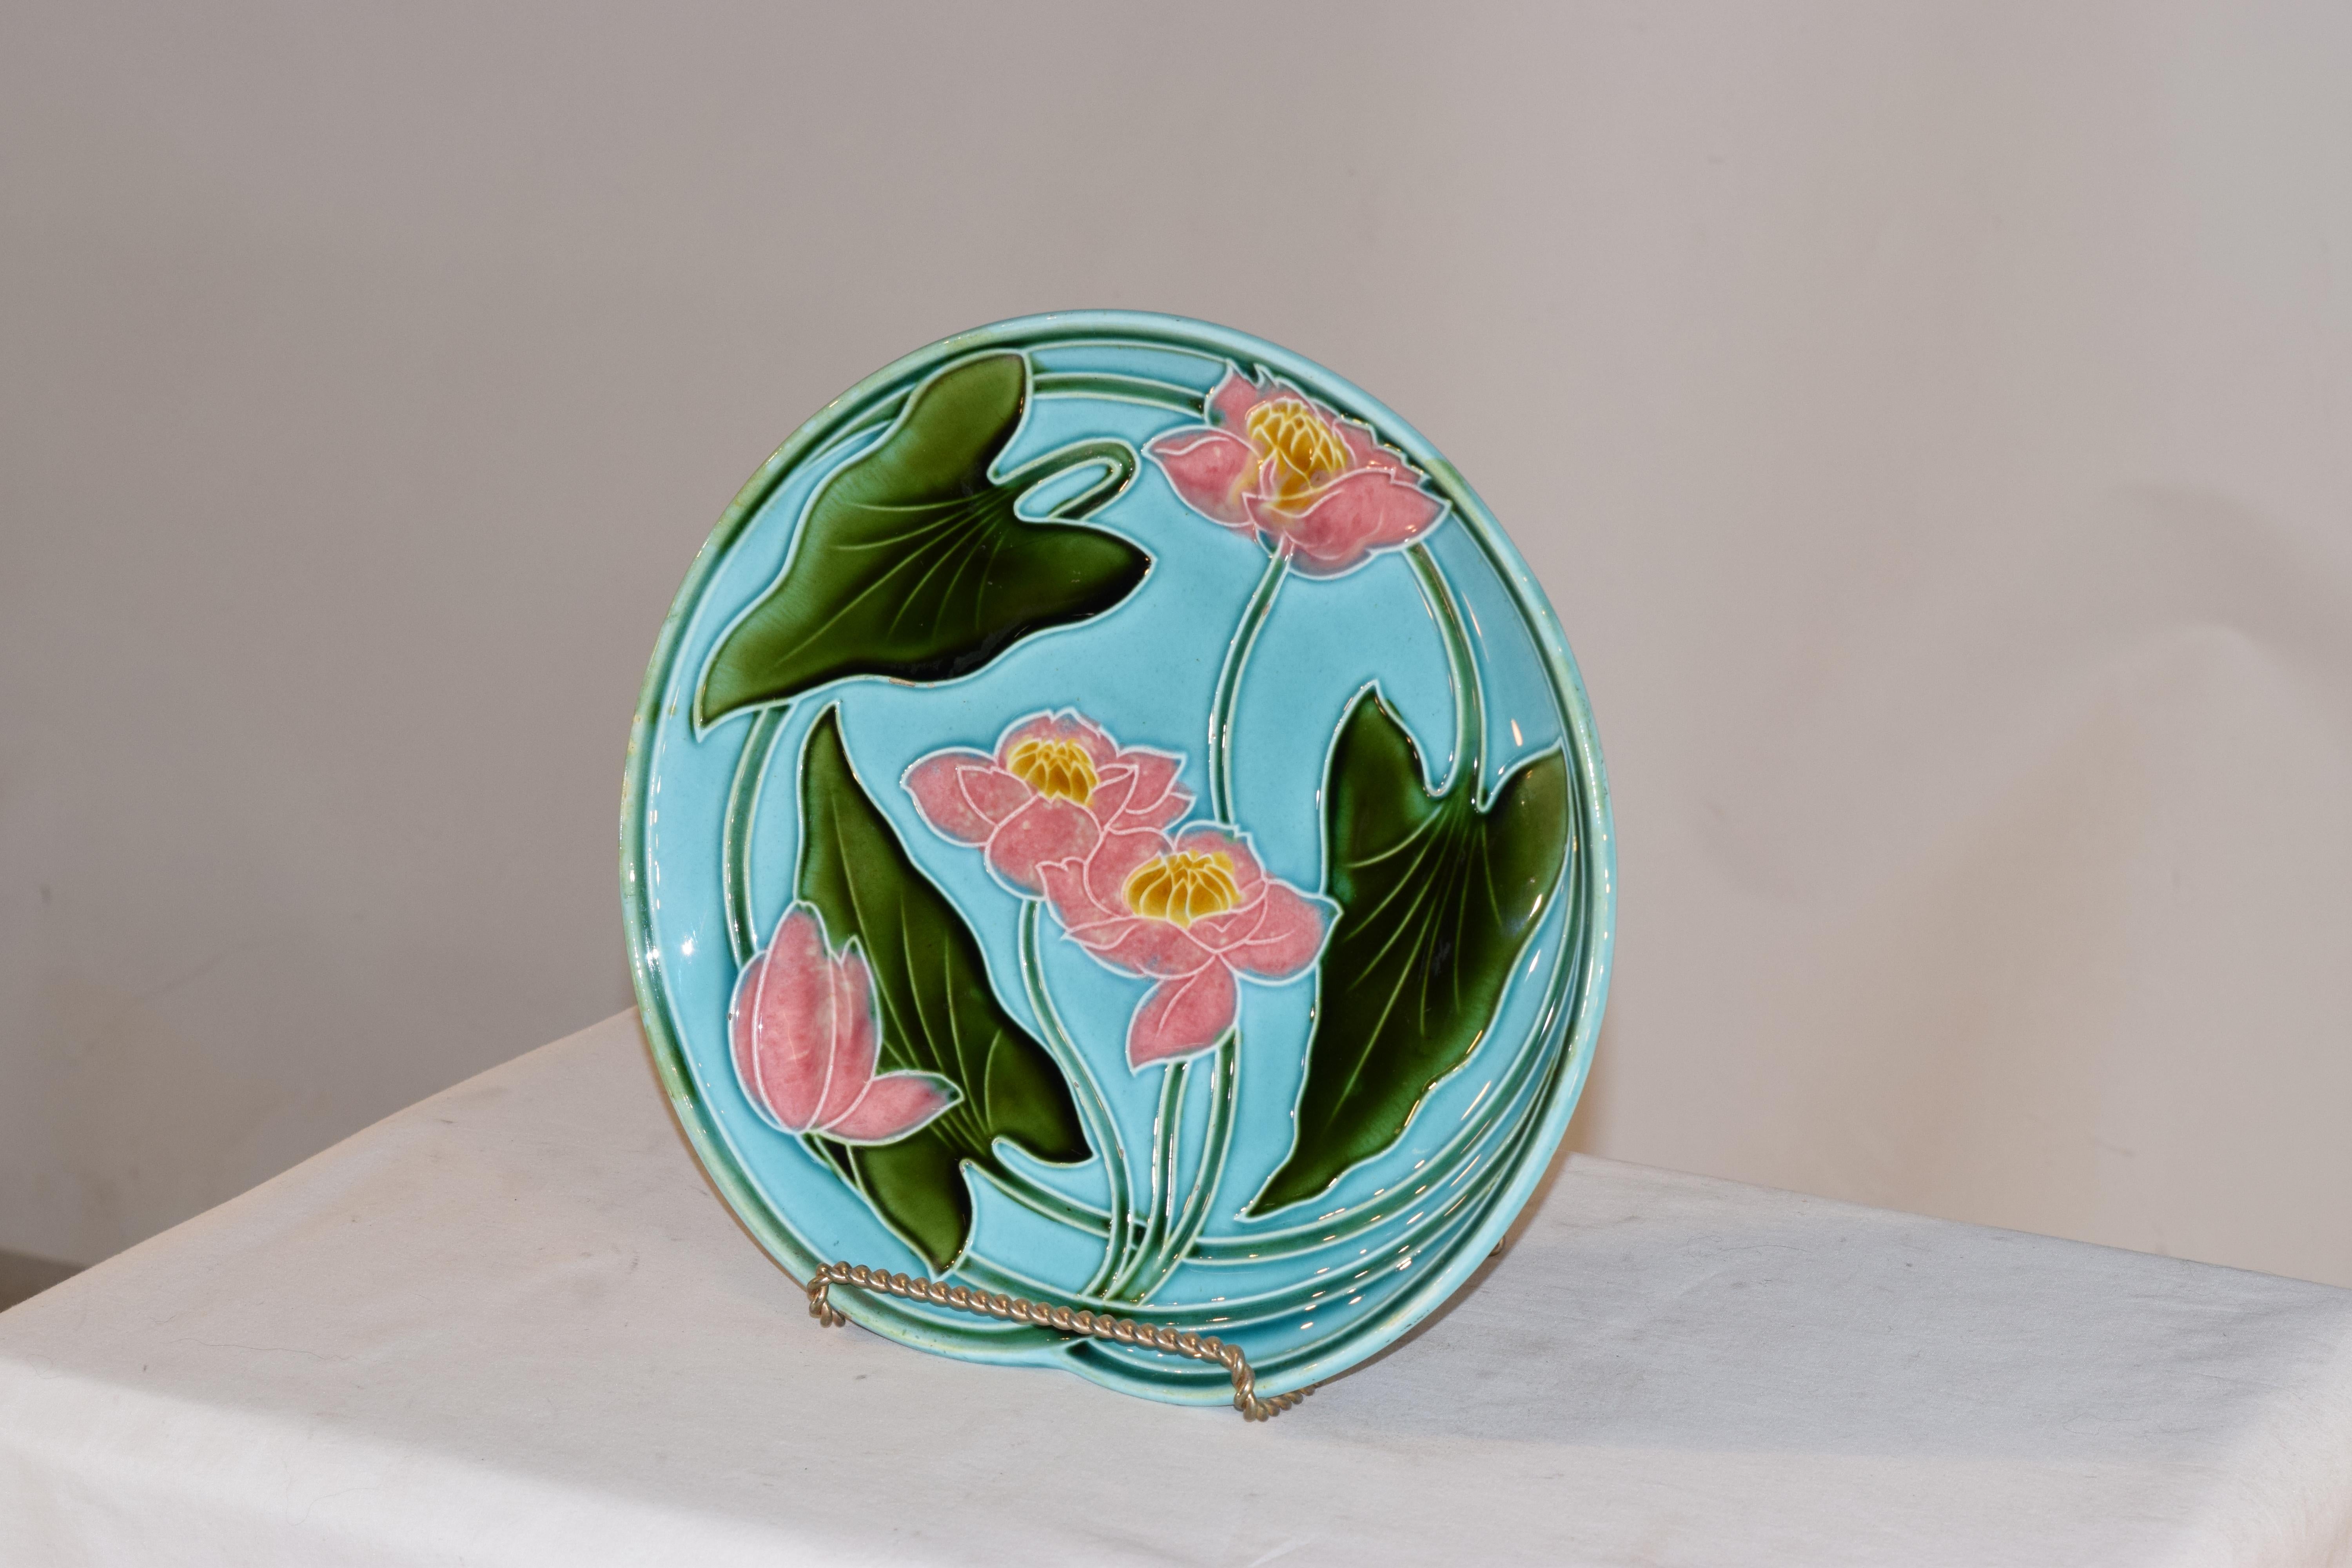 Villeroy & Boch majolica charger in brilliant Art Nouveau design. Signed on the reverse with the Villeroy & Boch Schramburg mark, which dates it from 1883-1912. Stand not included.